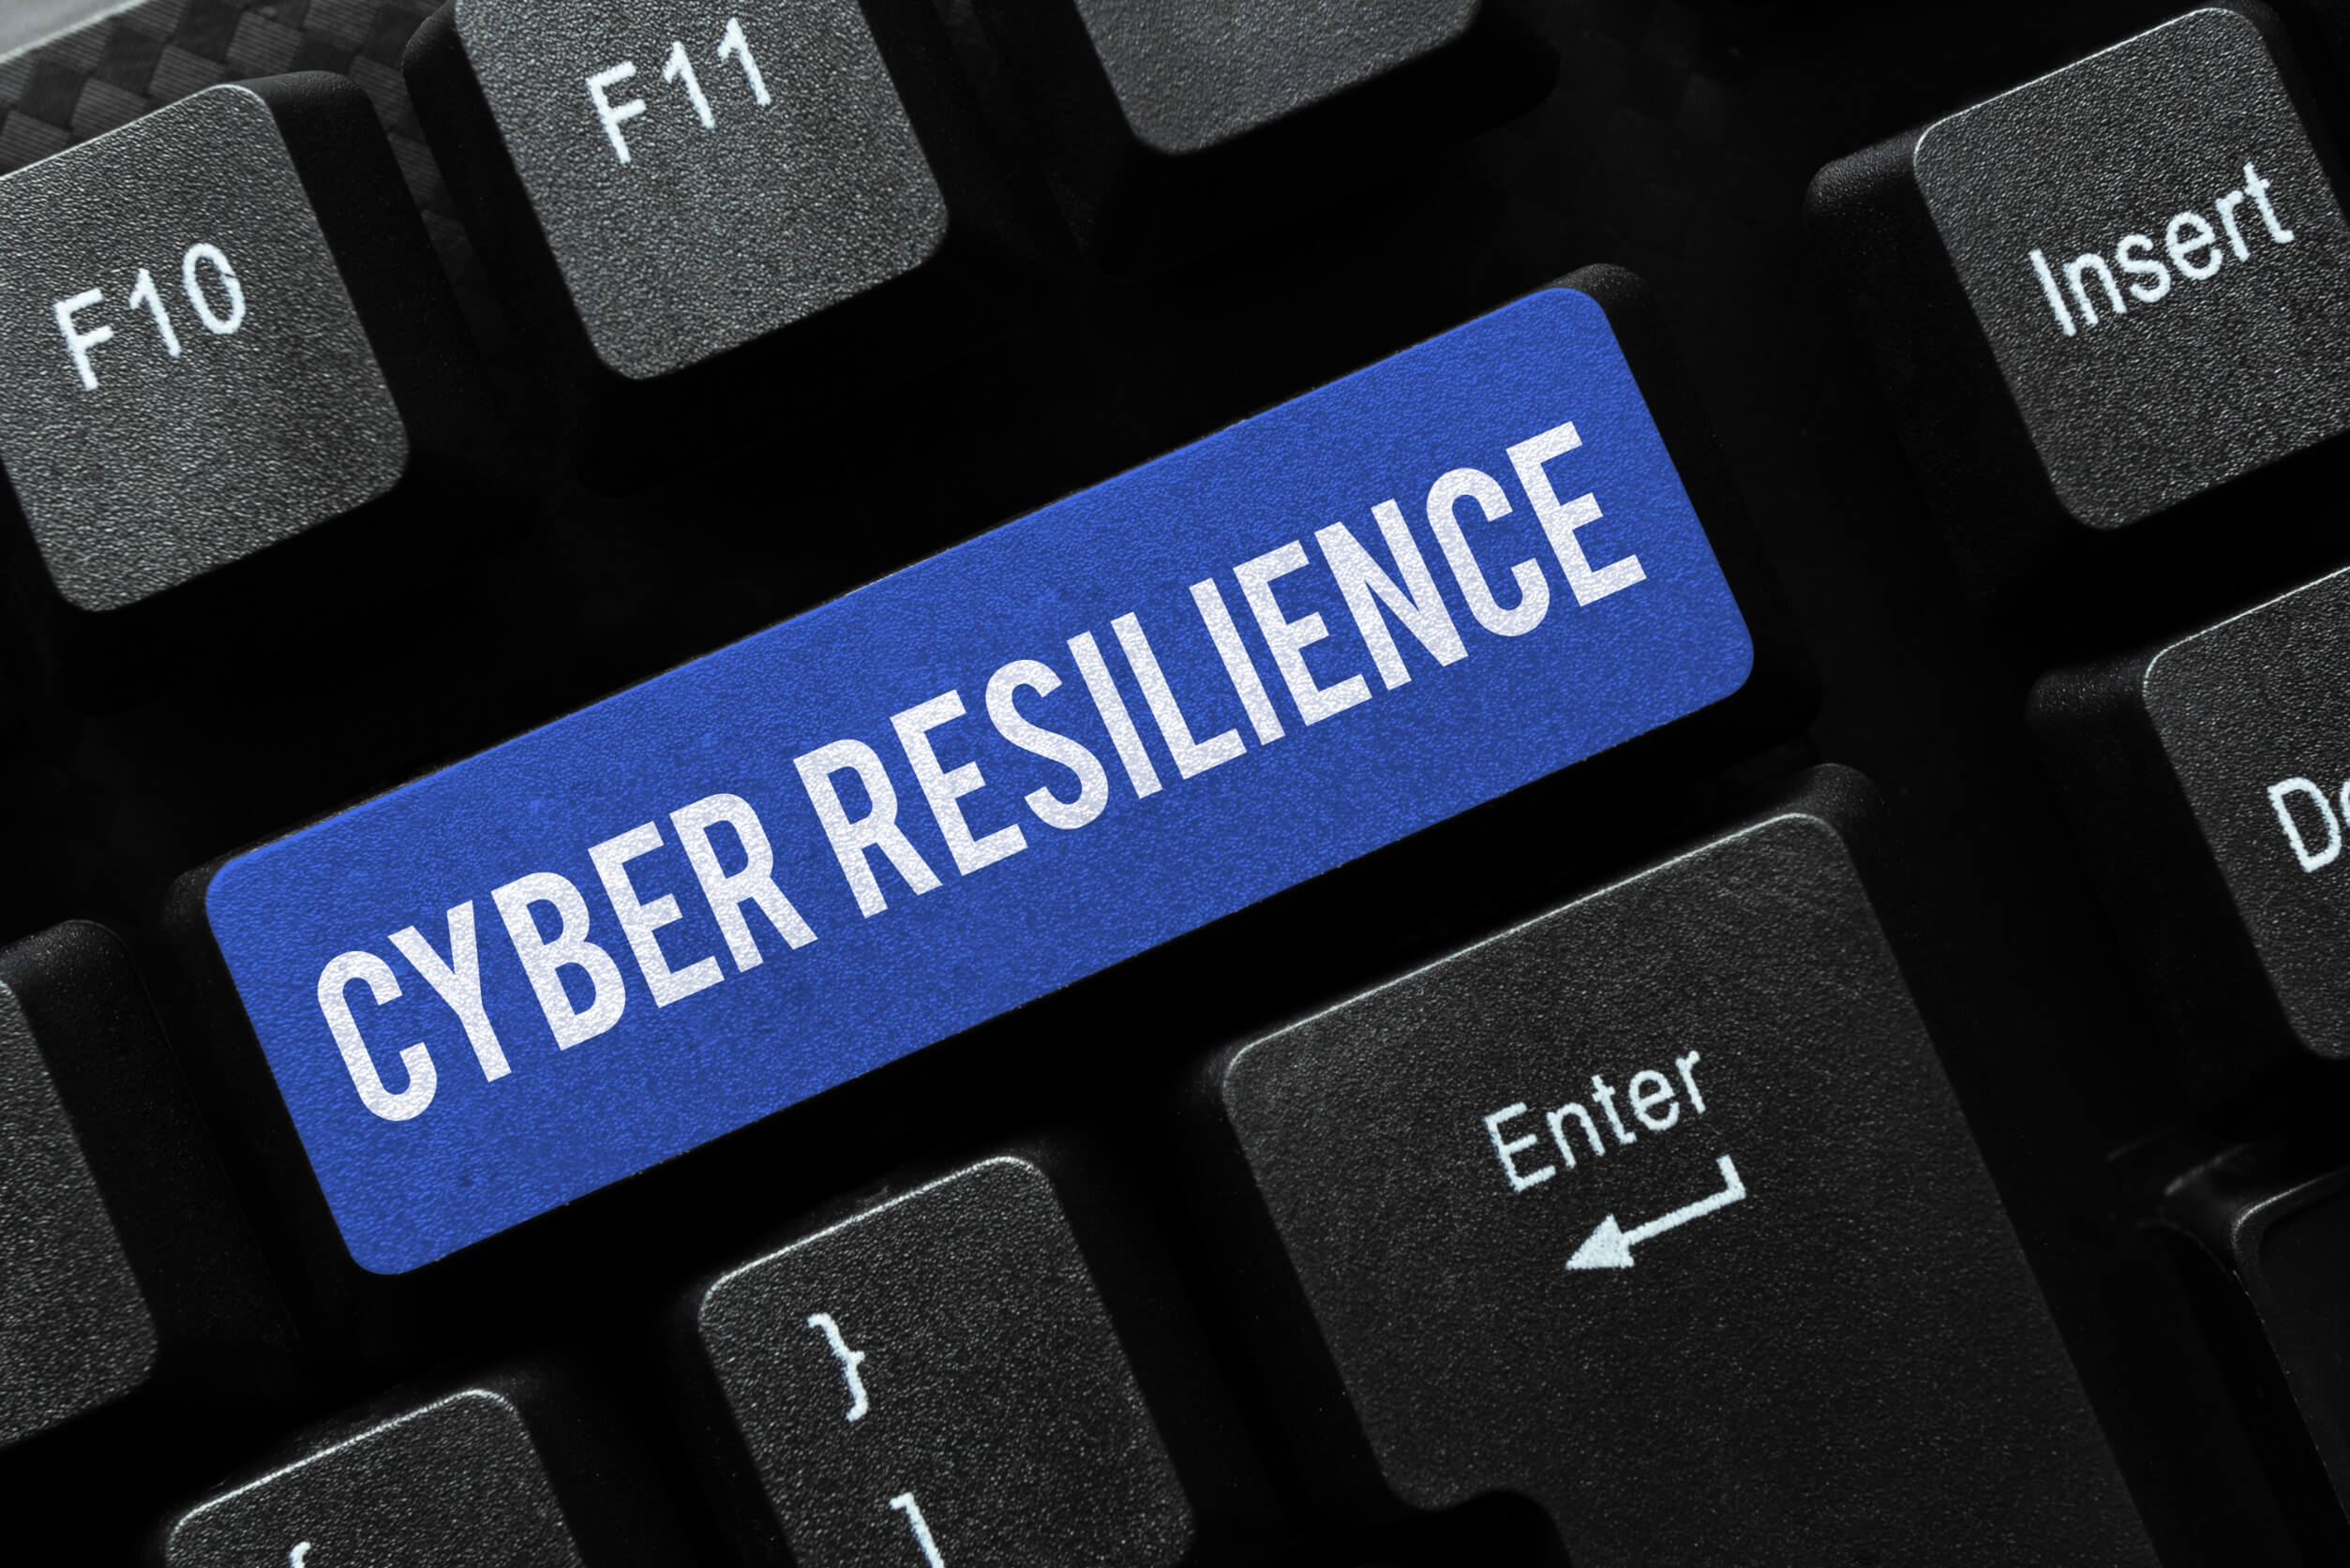 How to Enhance Cyber Resilience with Cyber Attack Tabletop Exercises